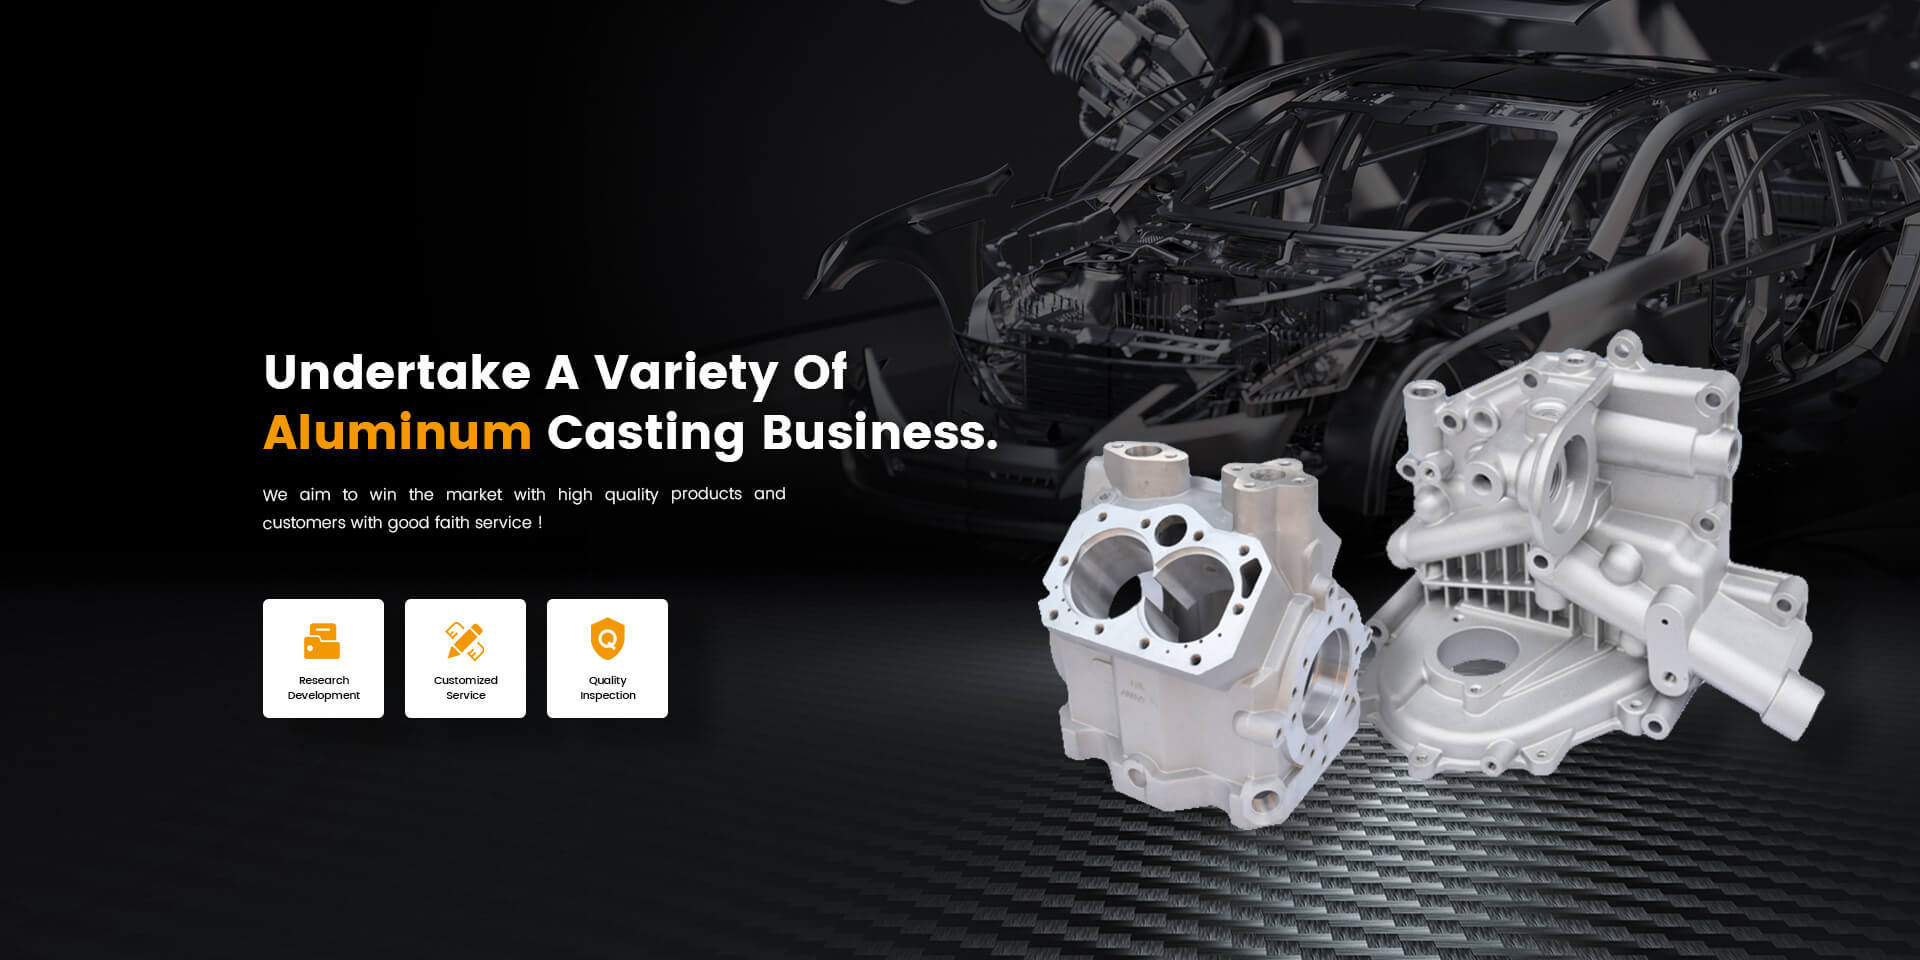 Undertake a variety of aluminum casting business